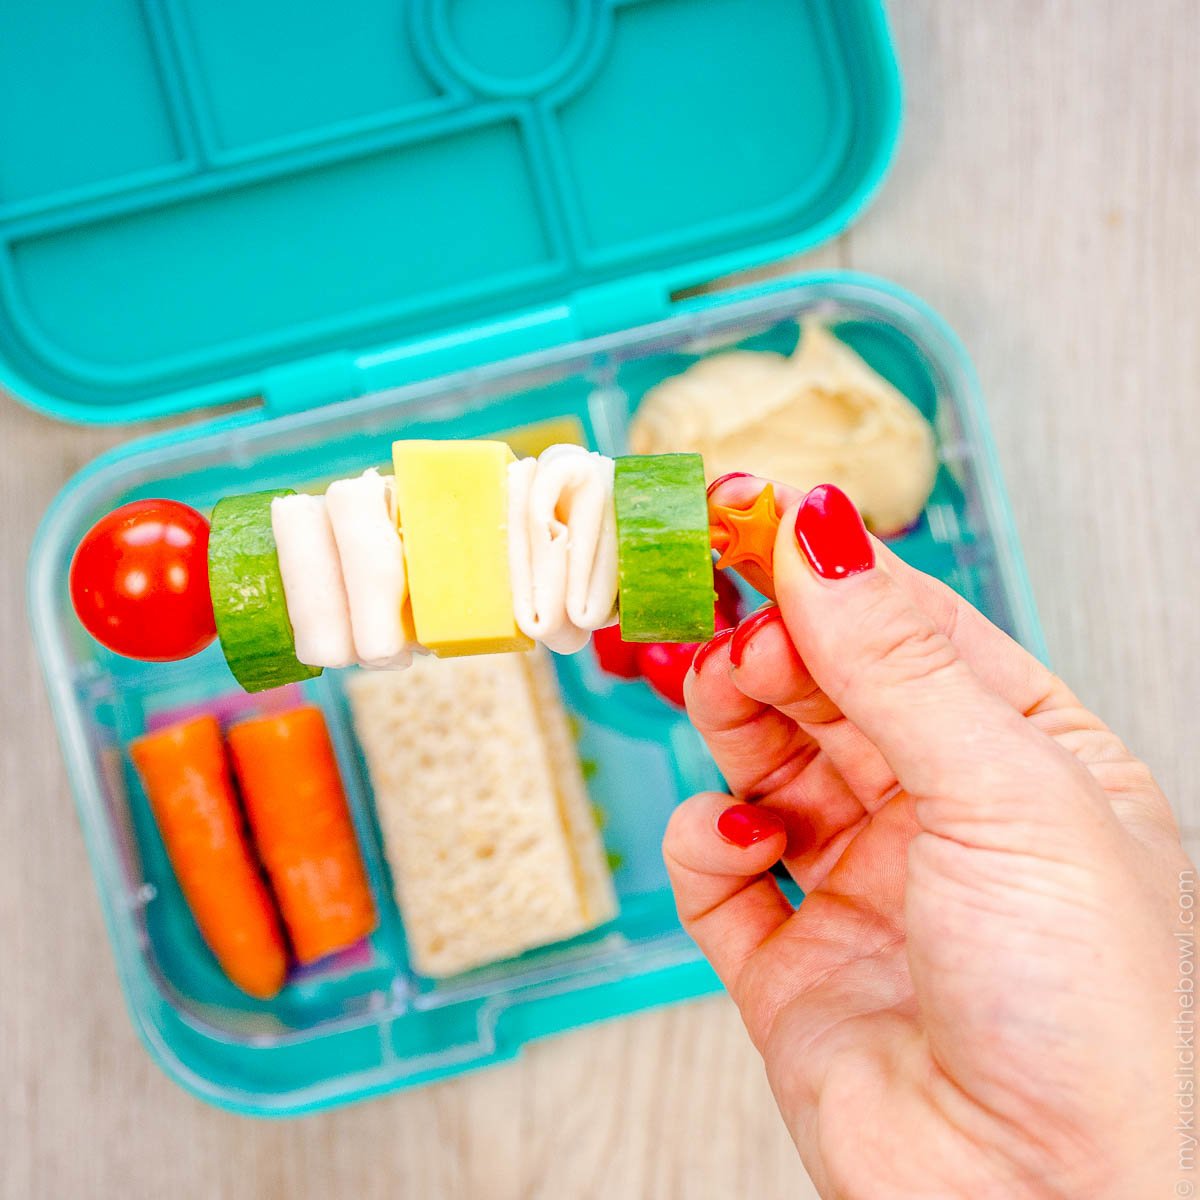 krullen Tot stand brengen chef Lunch Punch Stix 4-pack - roze | Yumboxlunch - Yumbox Benelux